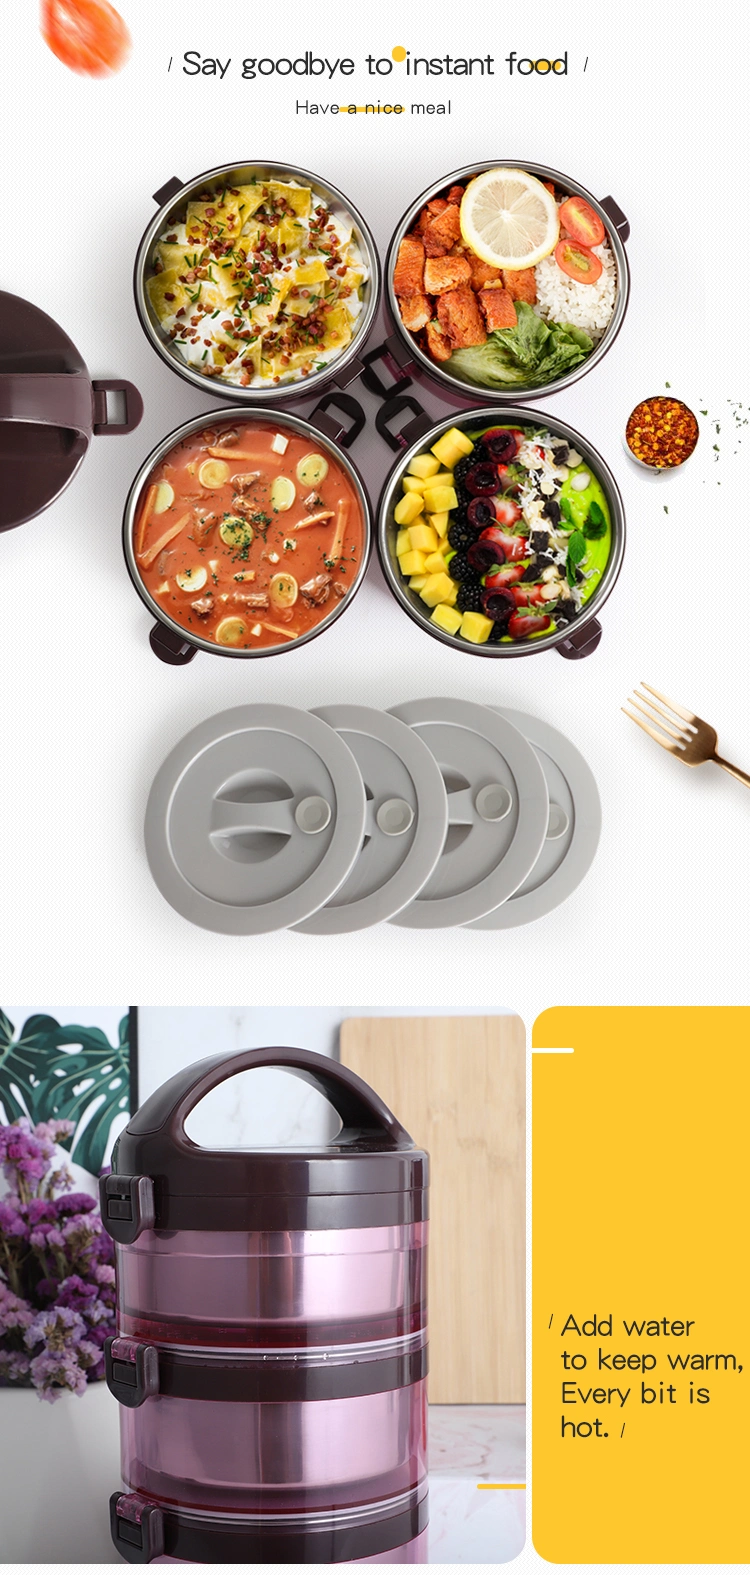 New Design Plastic Stainless Steel Round Multi-Layer Portable Heat Preservation Lunch Box Outdoor Food Storage